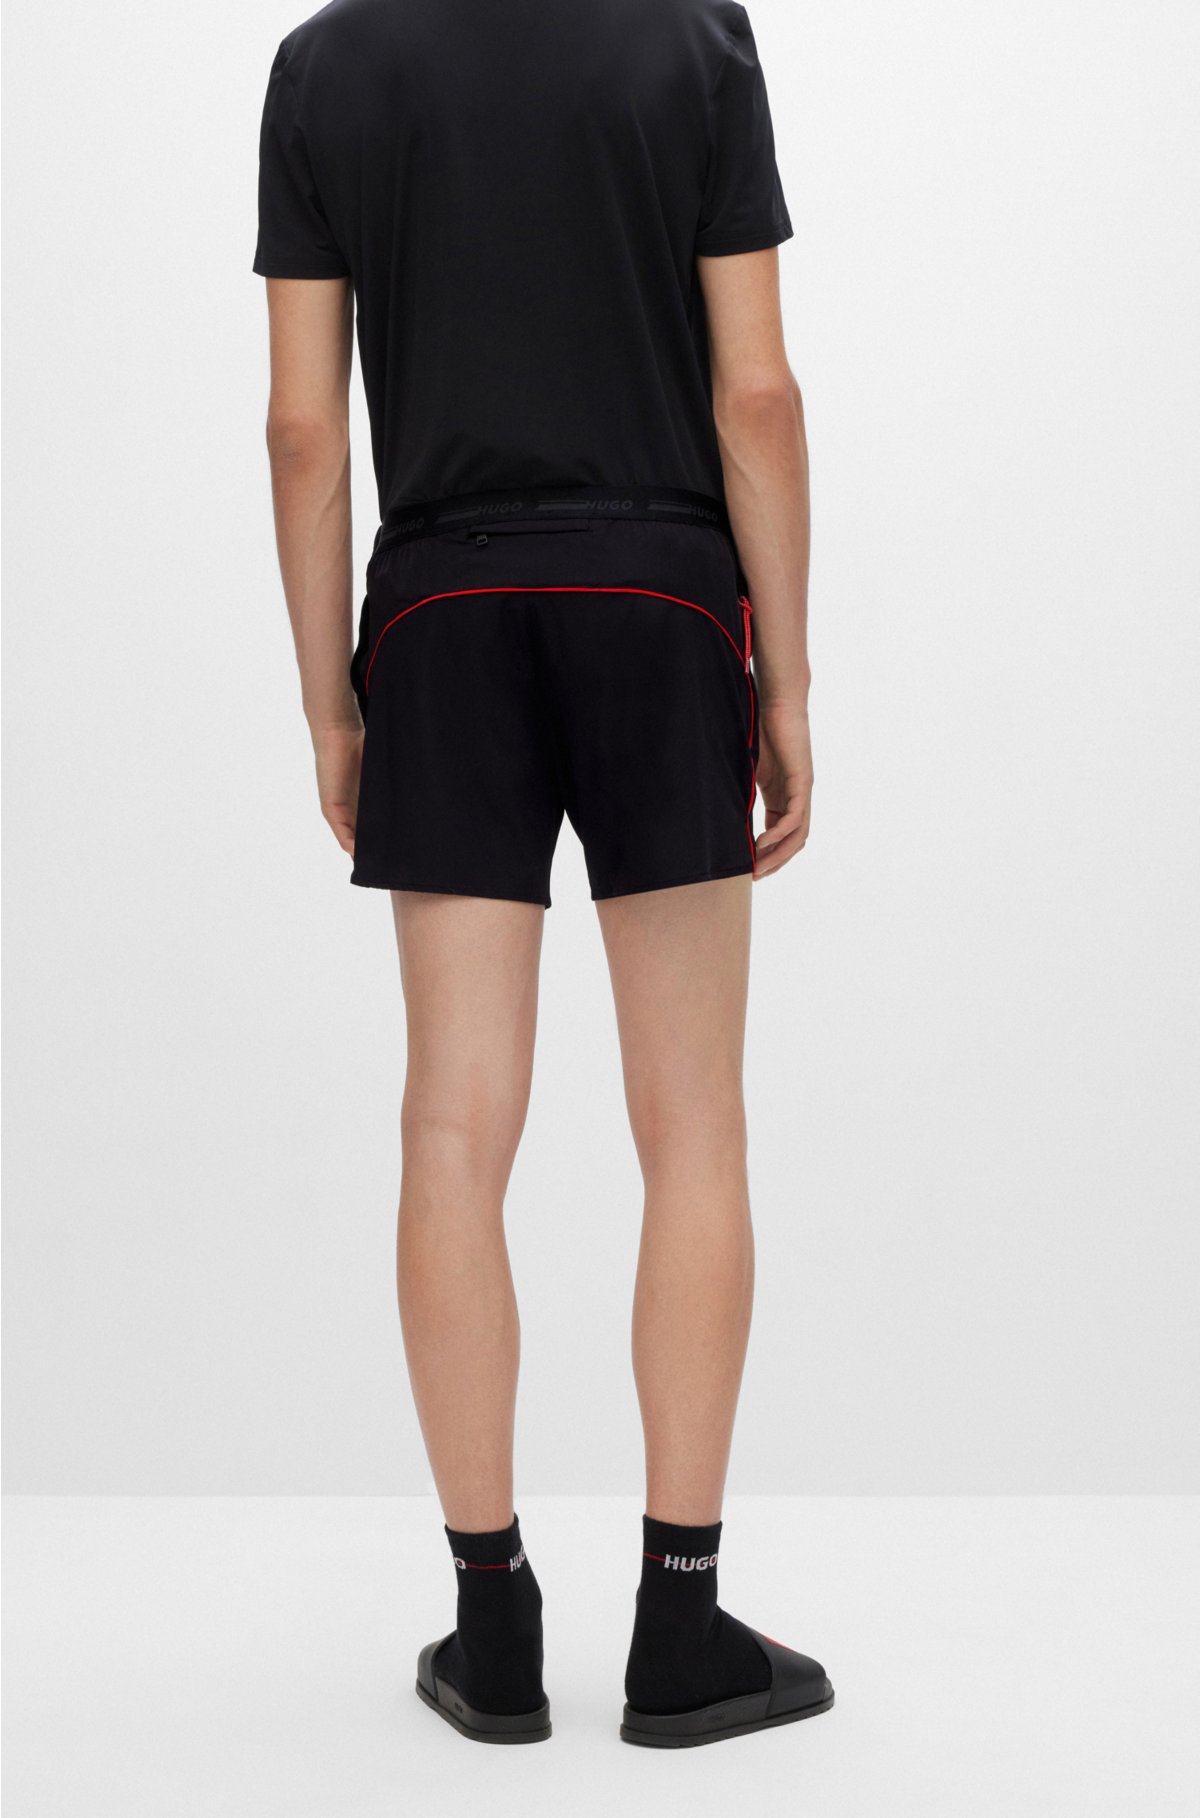 HUGO - Super-stretch shorts with piping and capsule logo